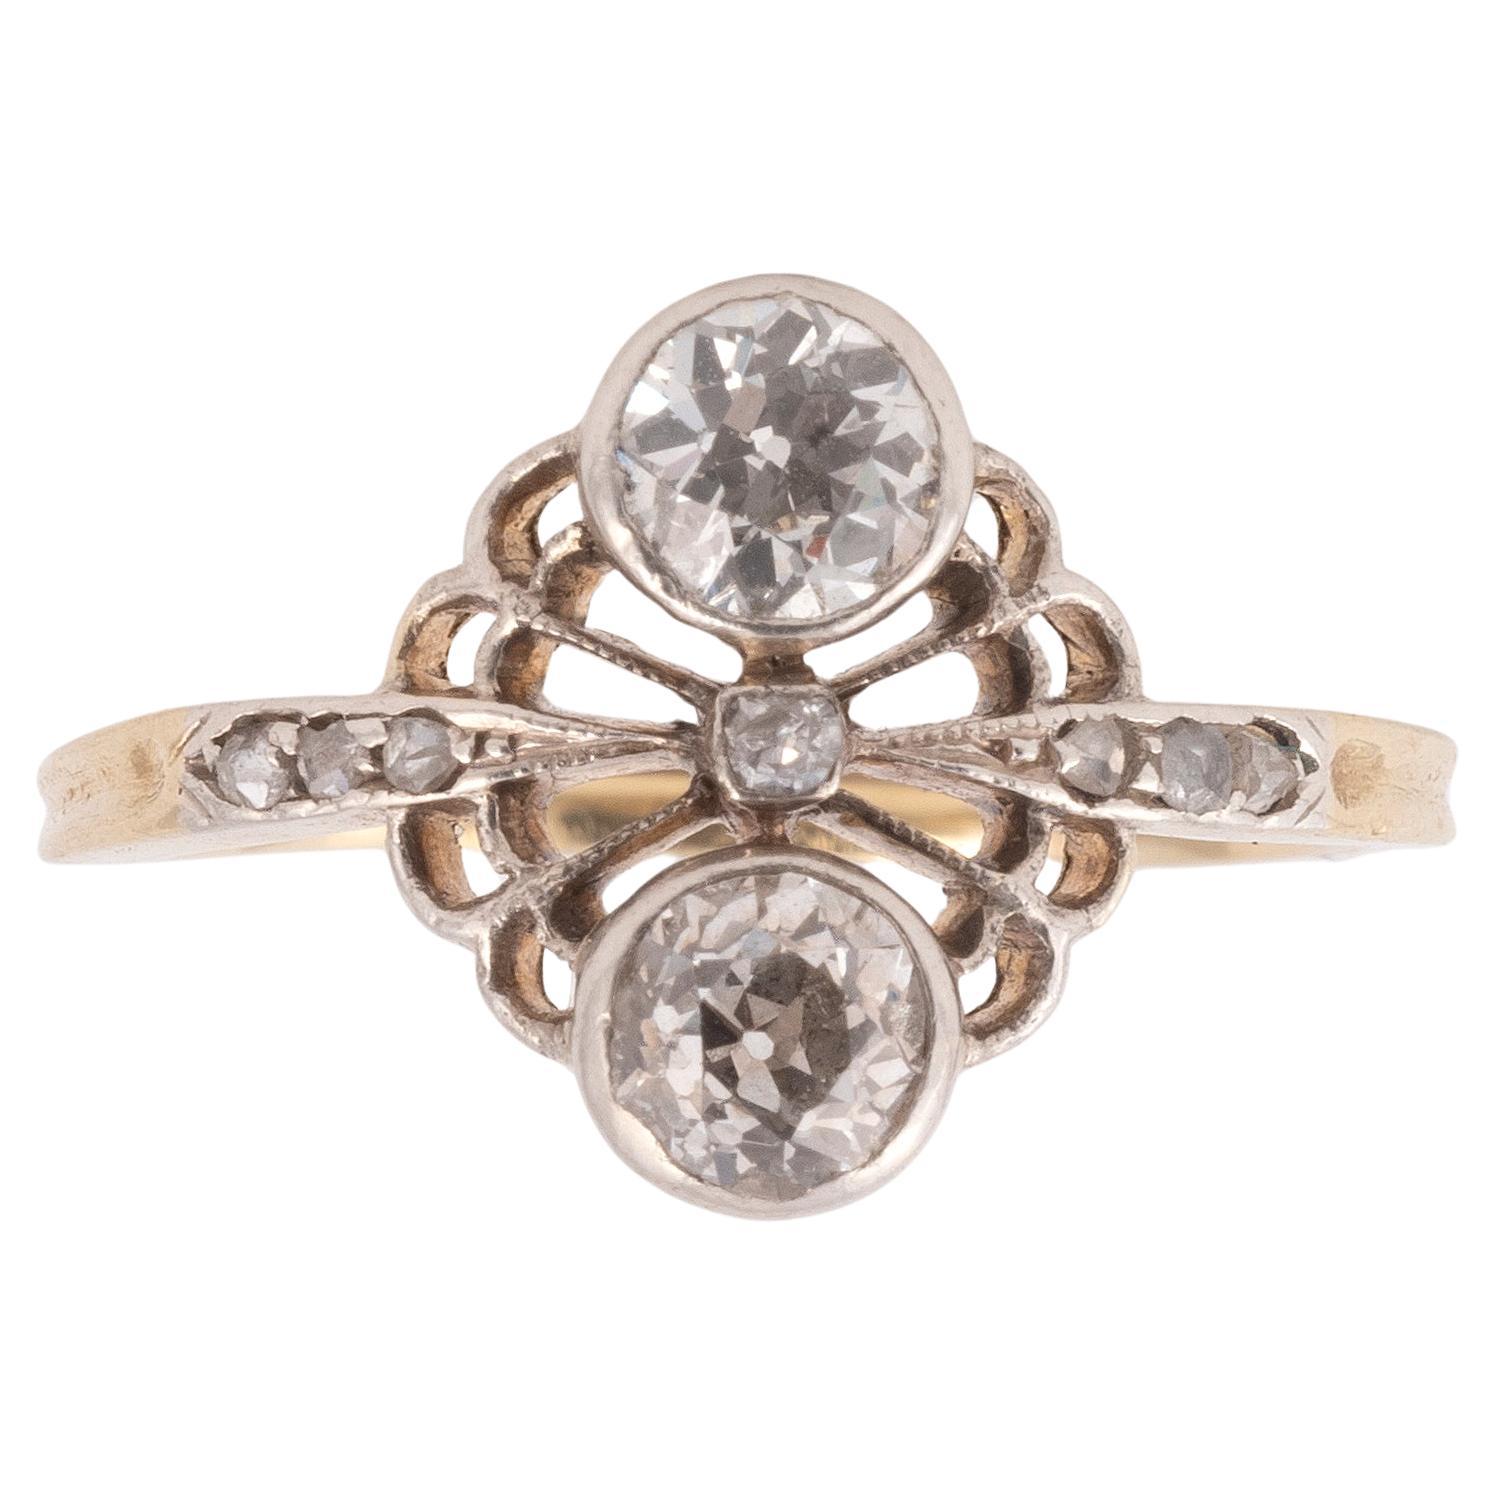 Art Deco Old Cut Diamond Ring circa 1925 In Excellent Condition For Sale In Firenze, IT